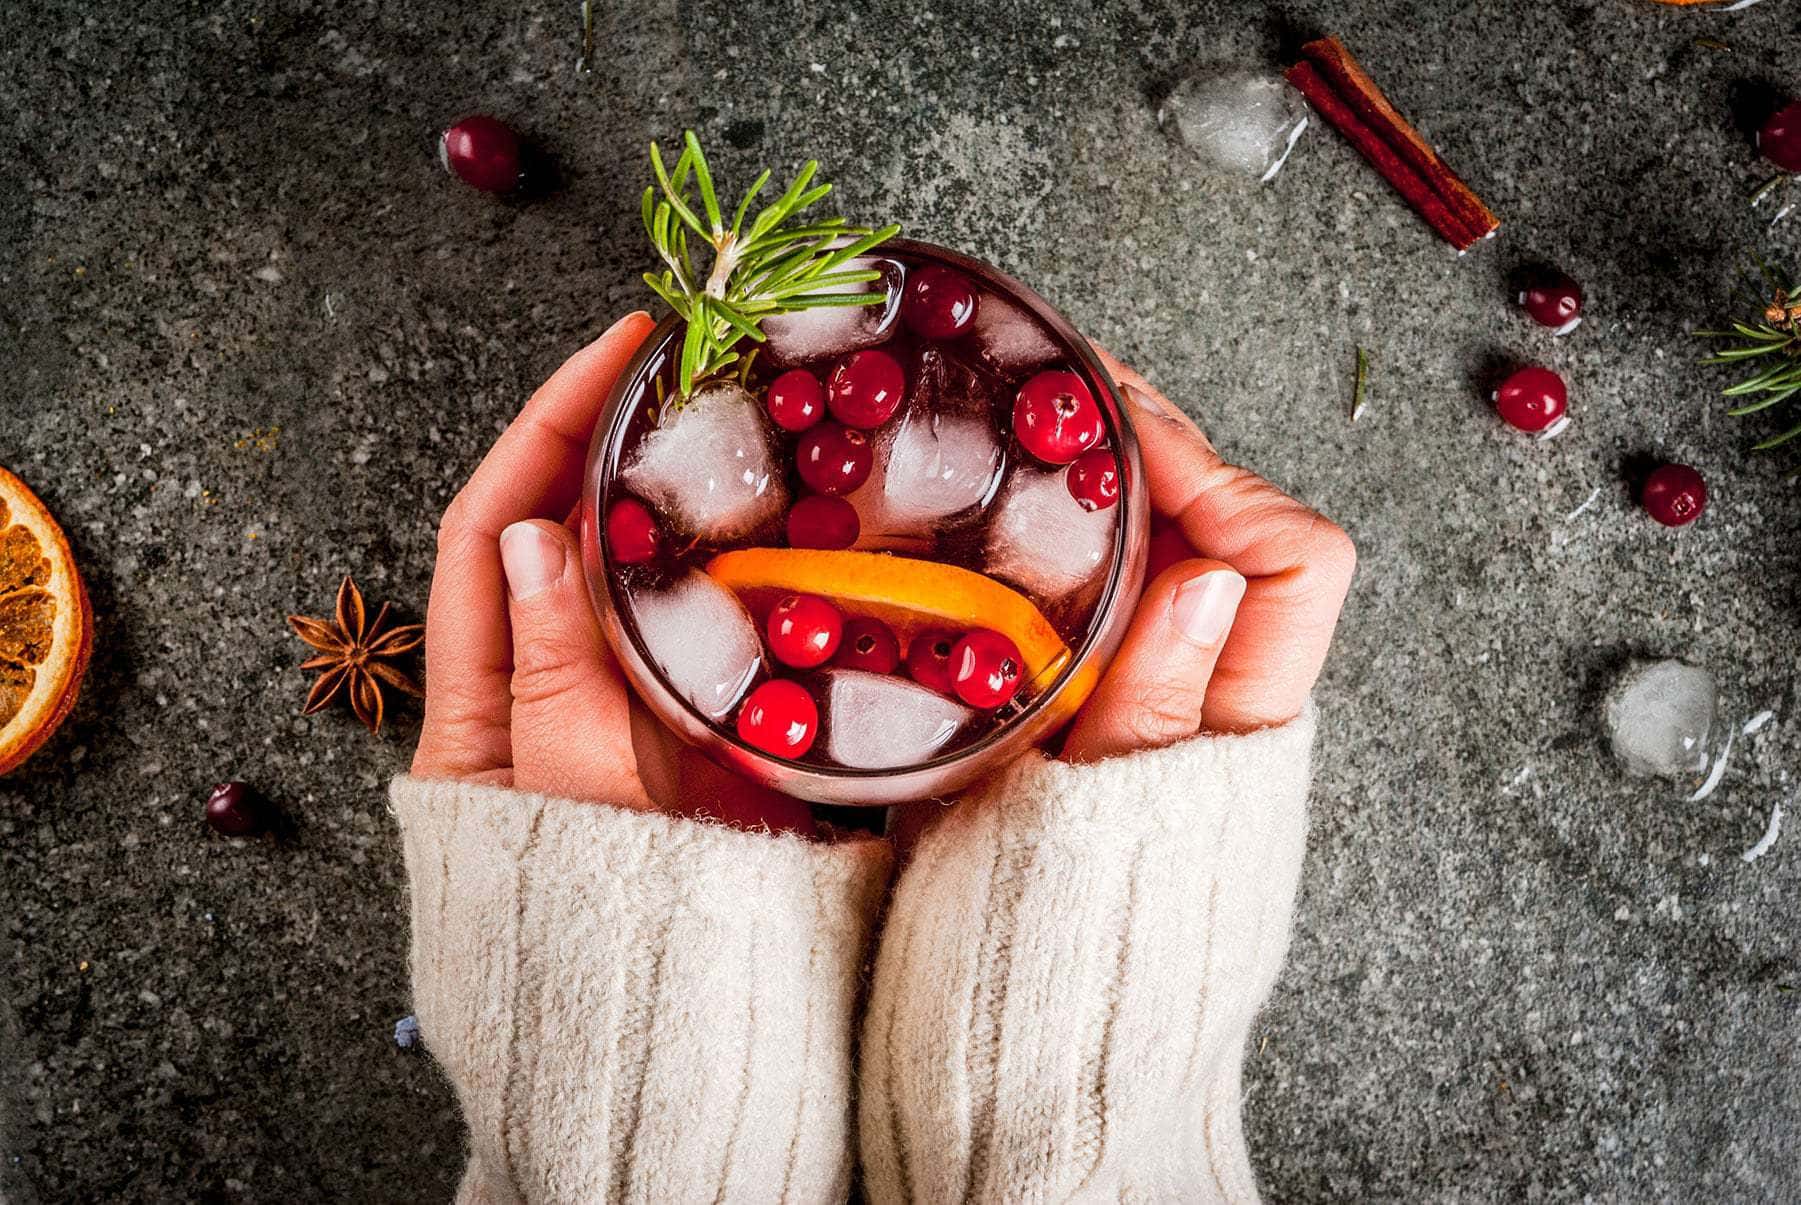 Top view of two hands holding a festive christmas cocktail garnished with cranberries, an orange slice, and a rosemary sprig.